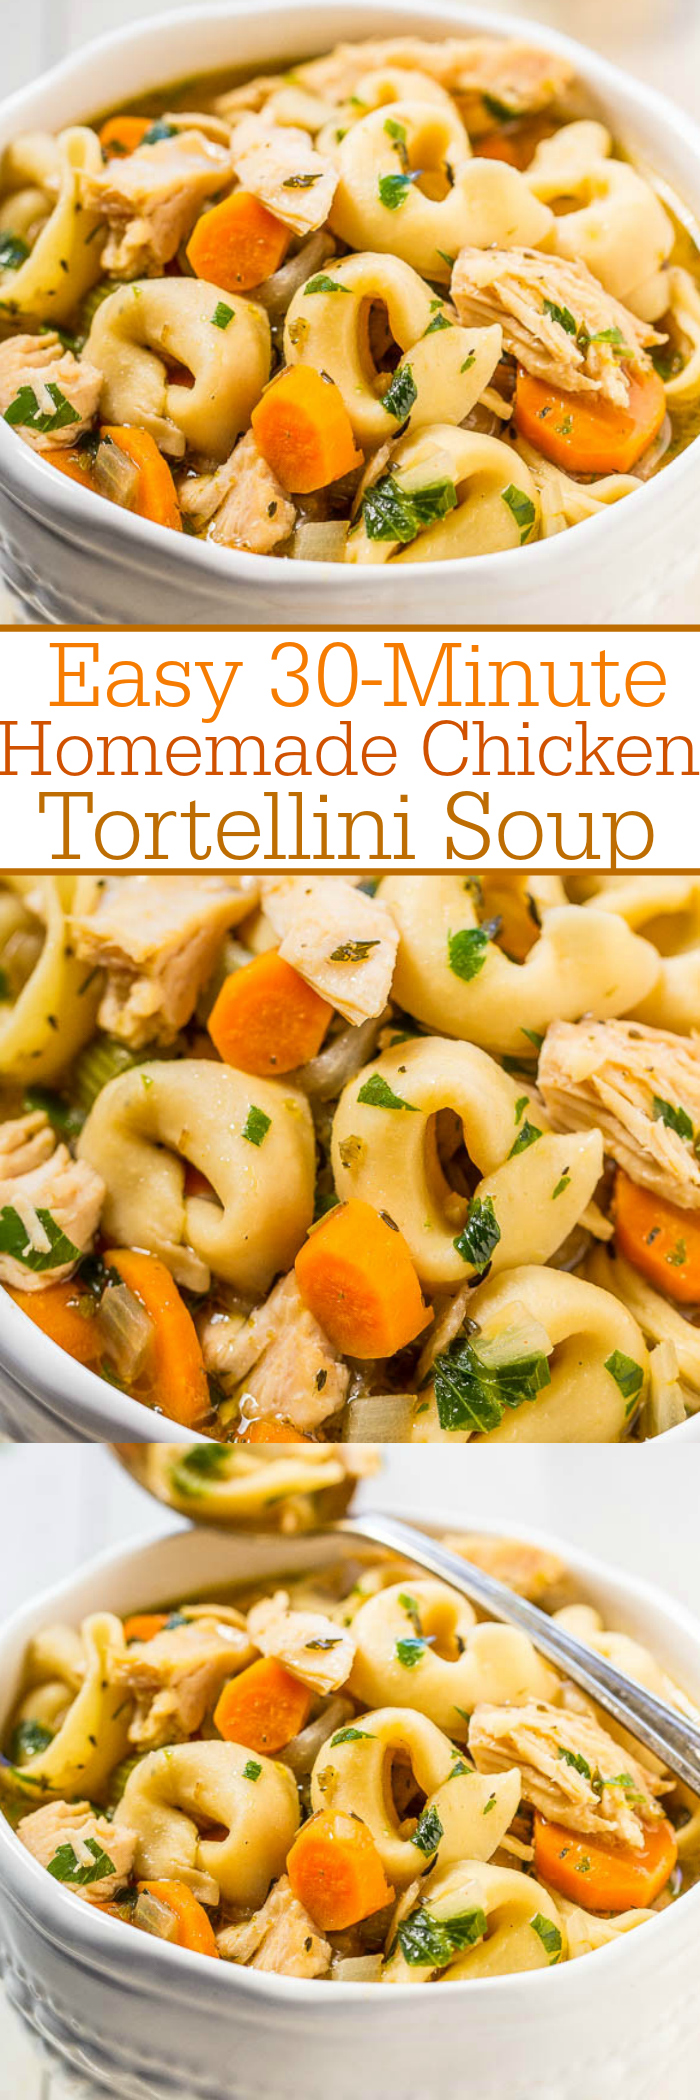 Easy 30-Minute Homemade Chicken Tortellini Soup - An fun spin on classic chicken noodle soup using cheese tortellini!! Fast, easy, comfort food that just hits the spot! You'll make it over and over again!!